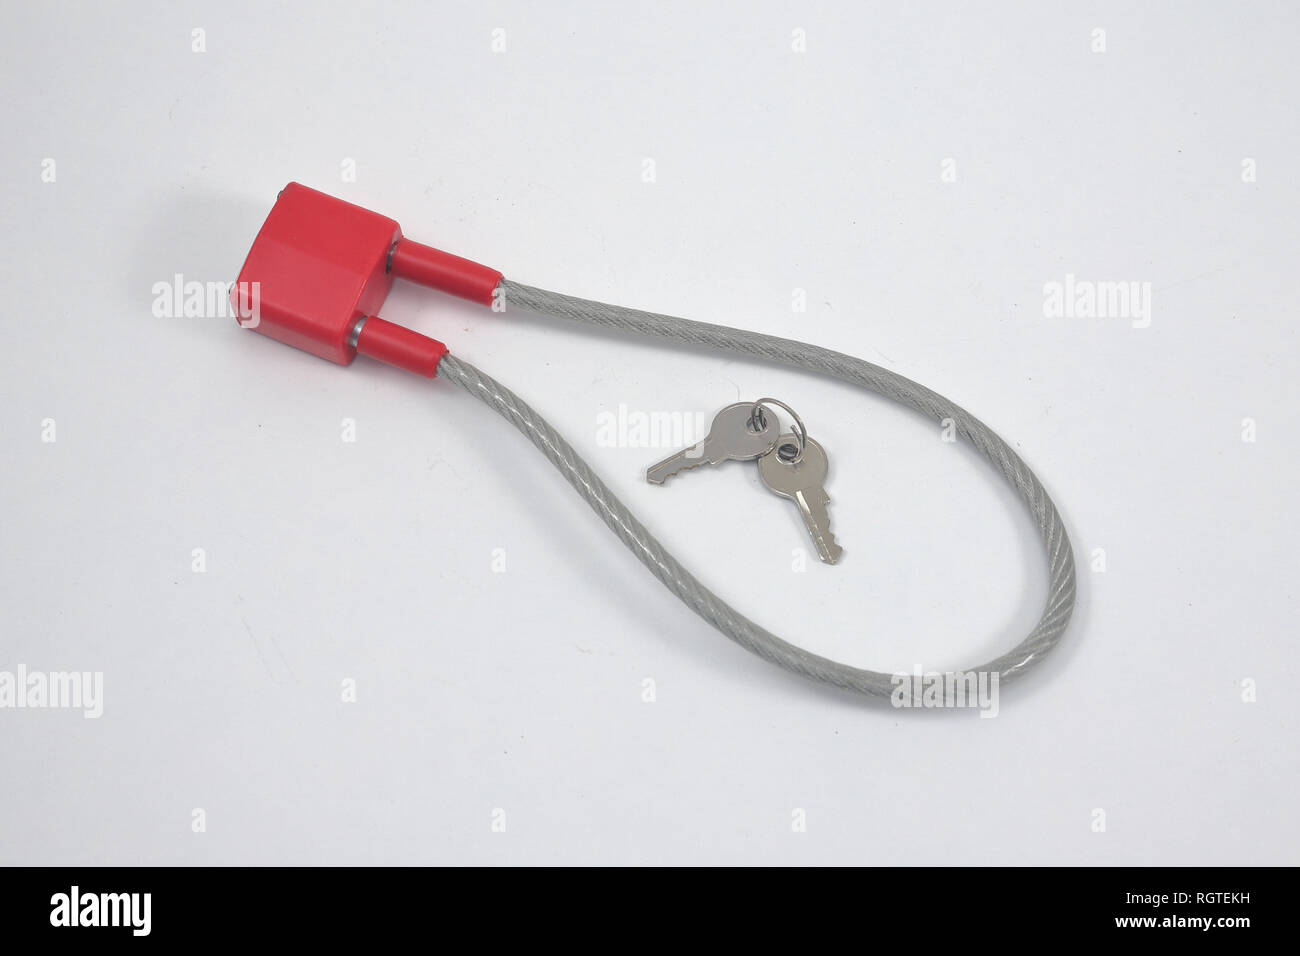 Locks and keys used to safely secure a firearm from being used. Stock Photo